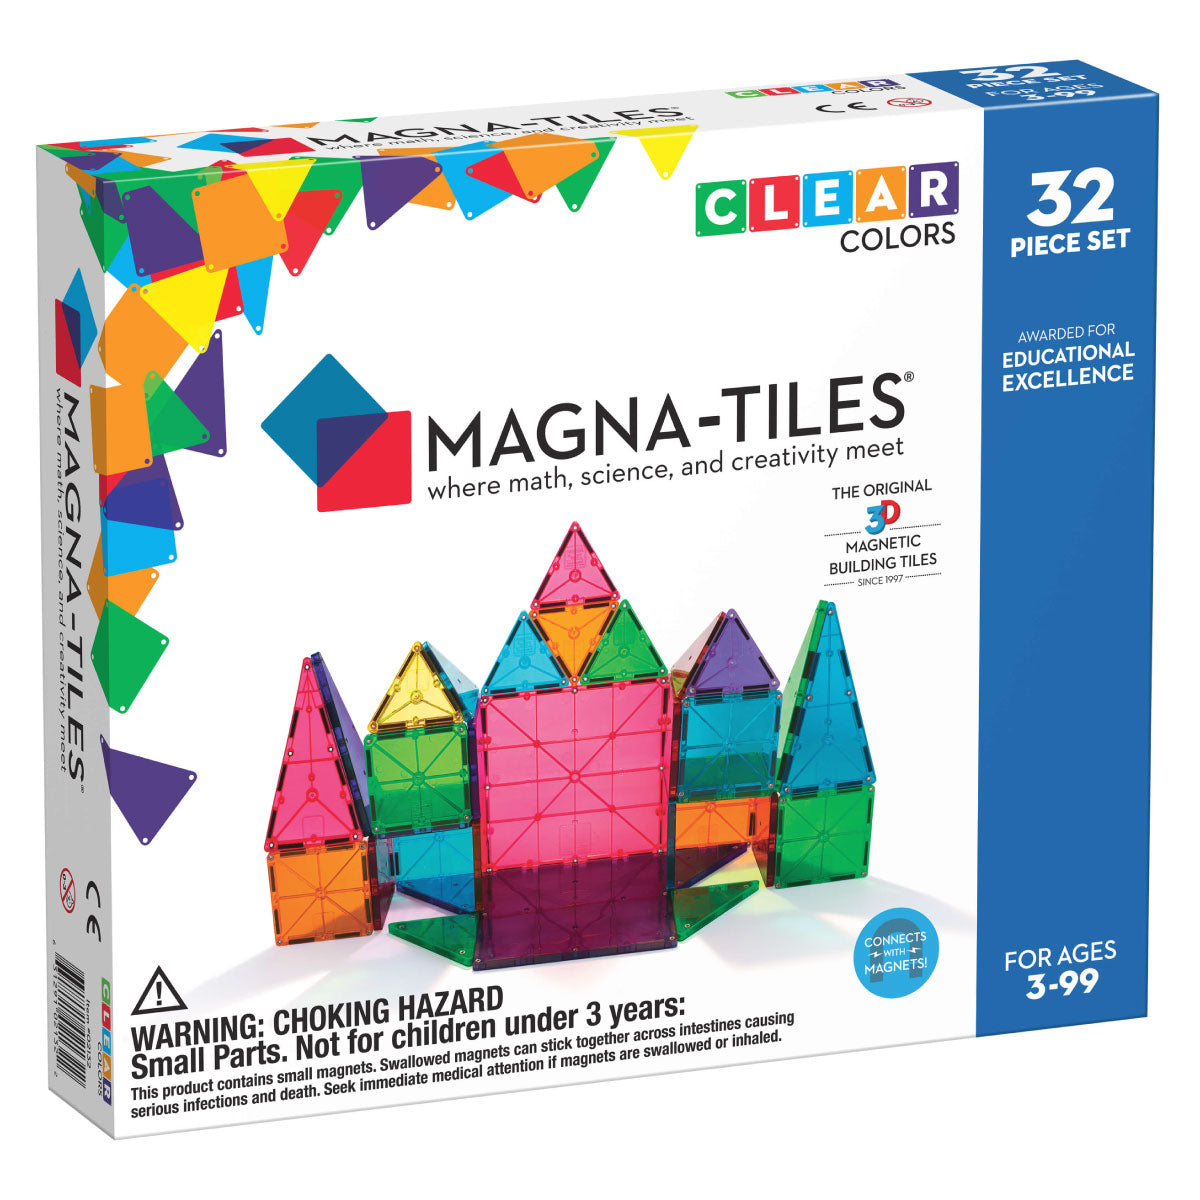 Magna-Tiles 32 Piece Clear Colors from Valtech